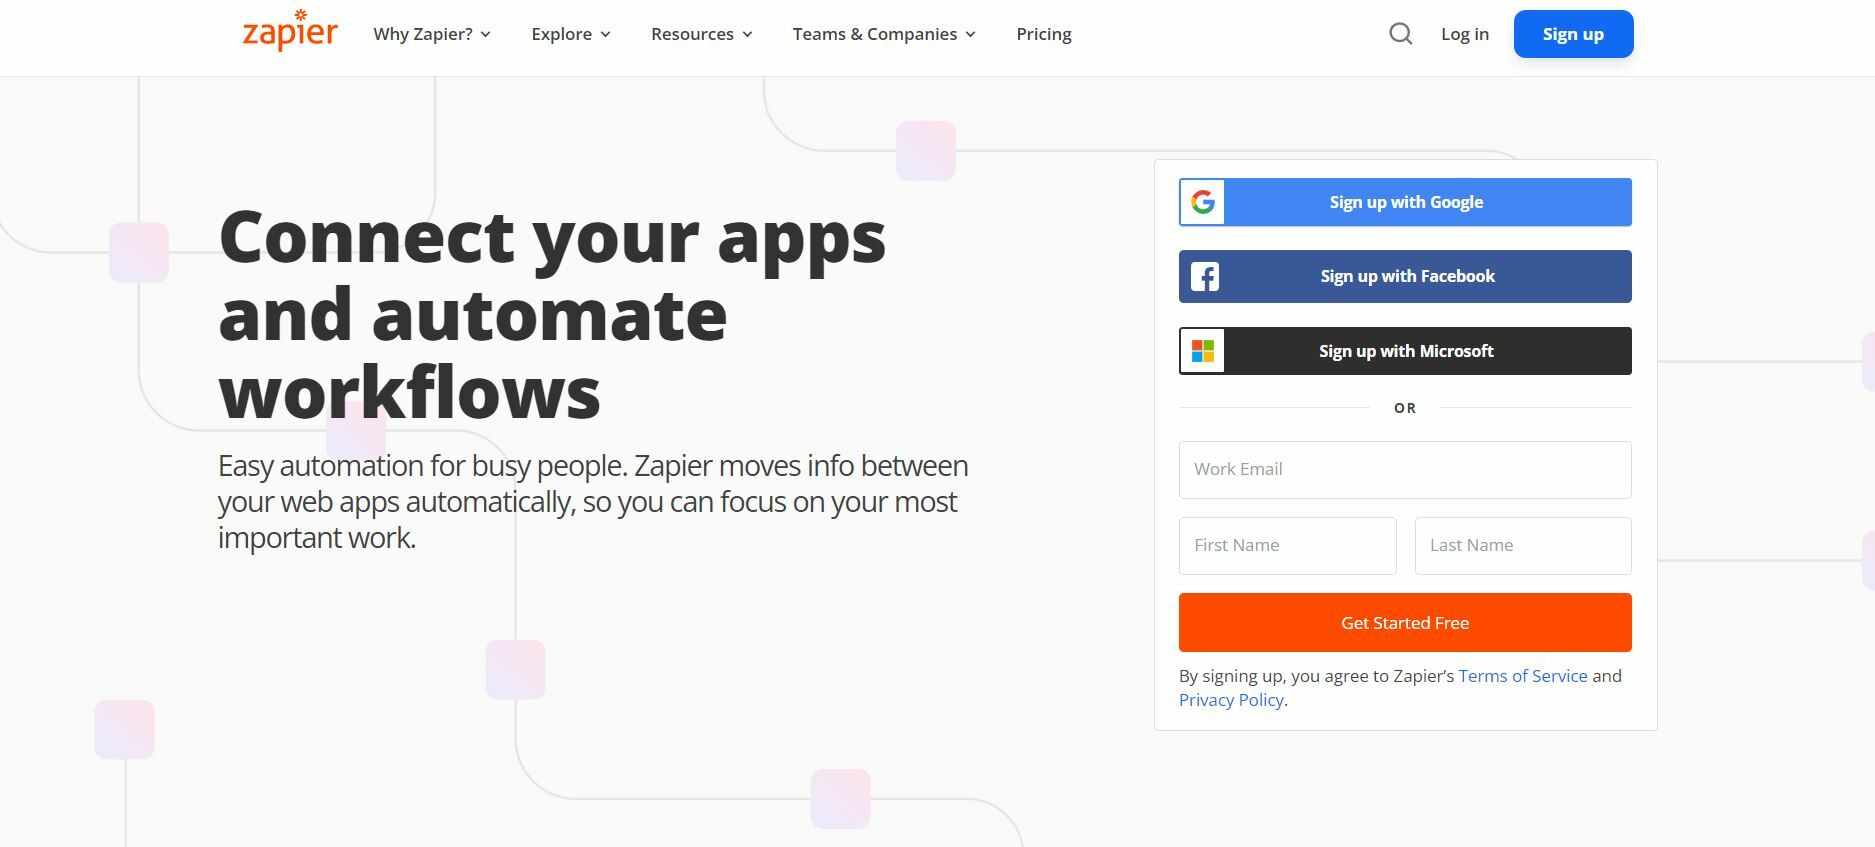 Apps and Tools for Small Businesses| Zapier.